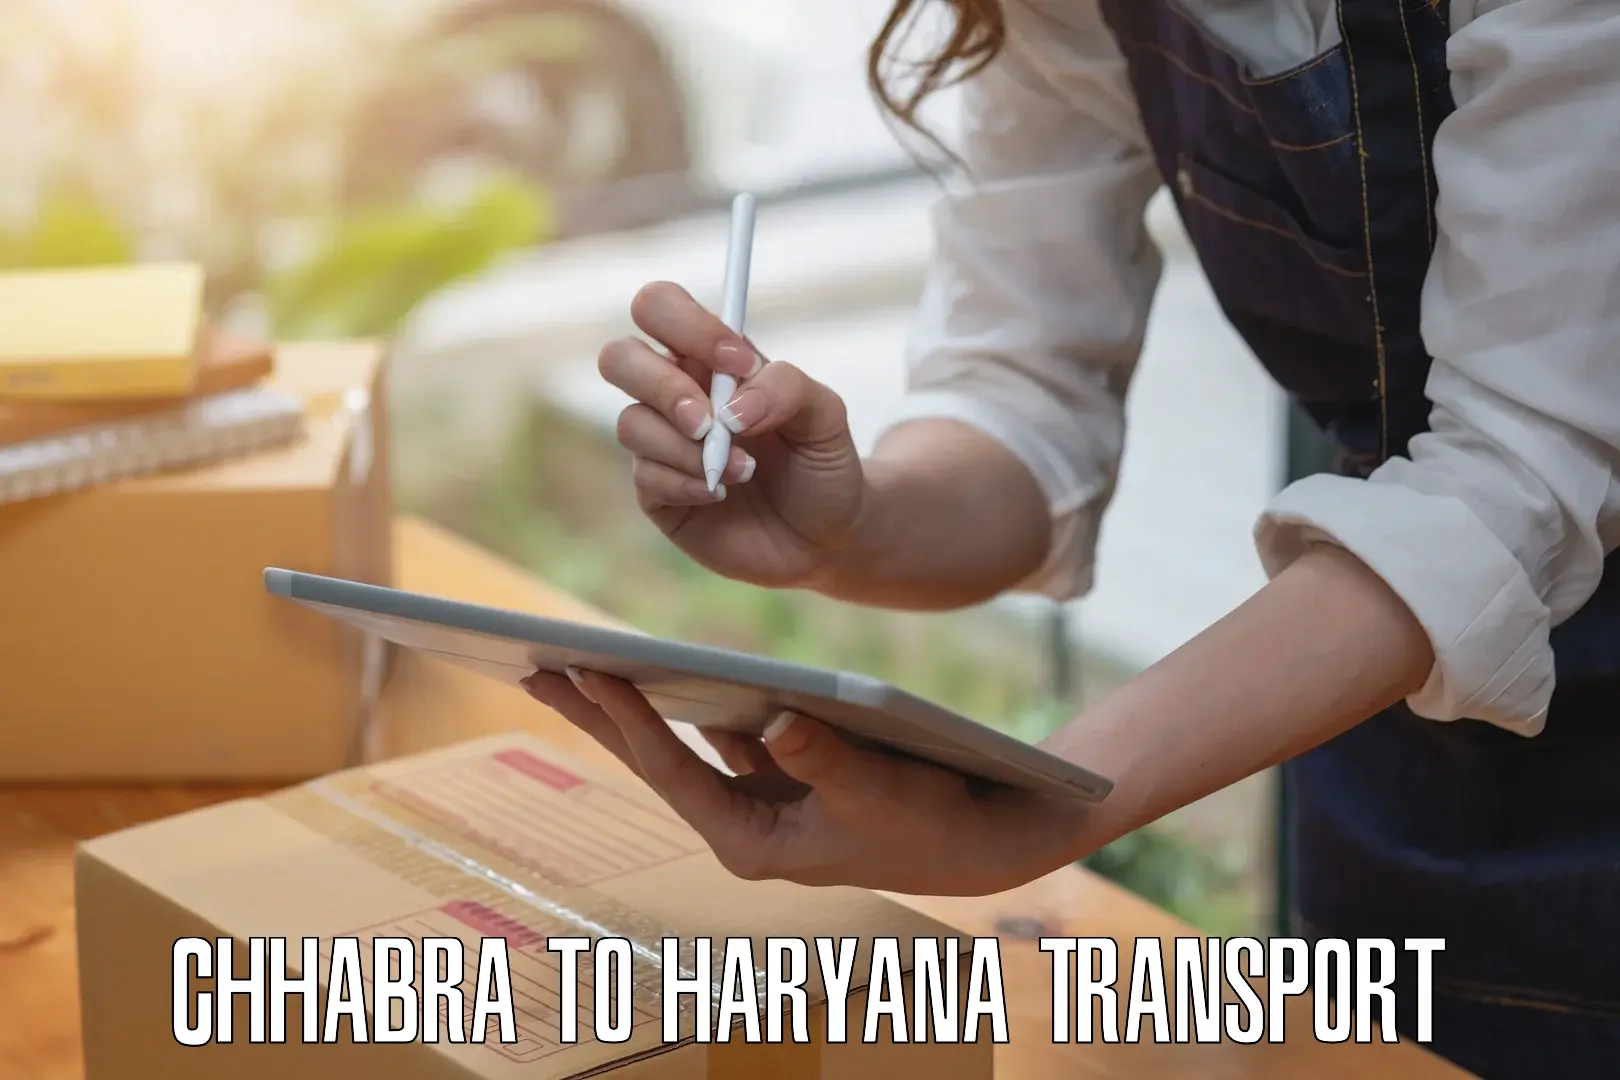 Transport services in Chhabra to Ambala